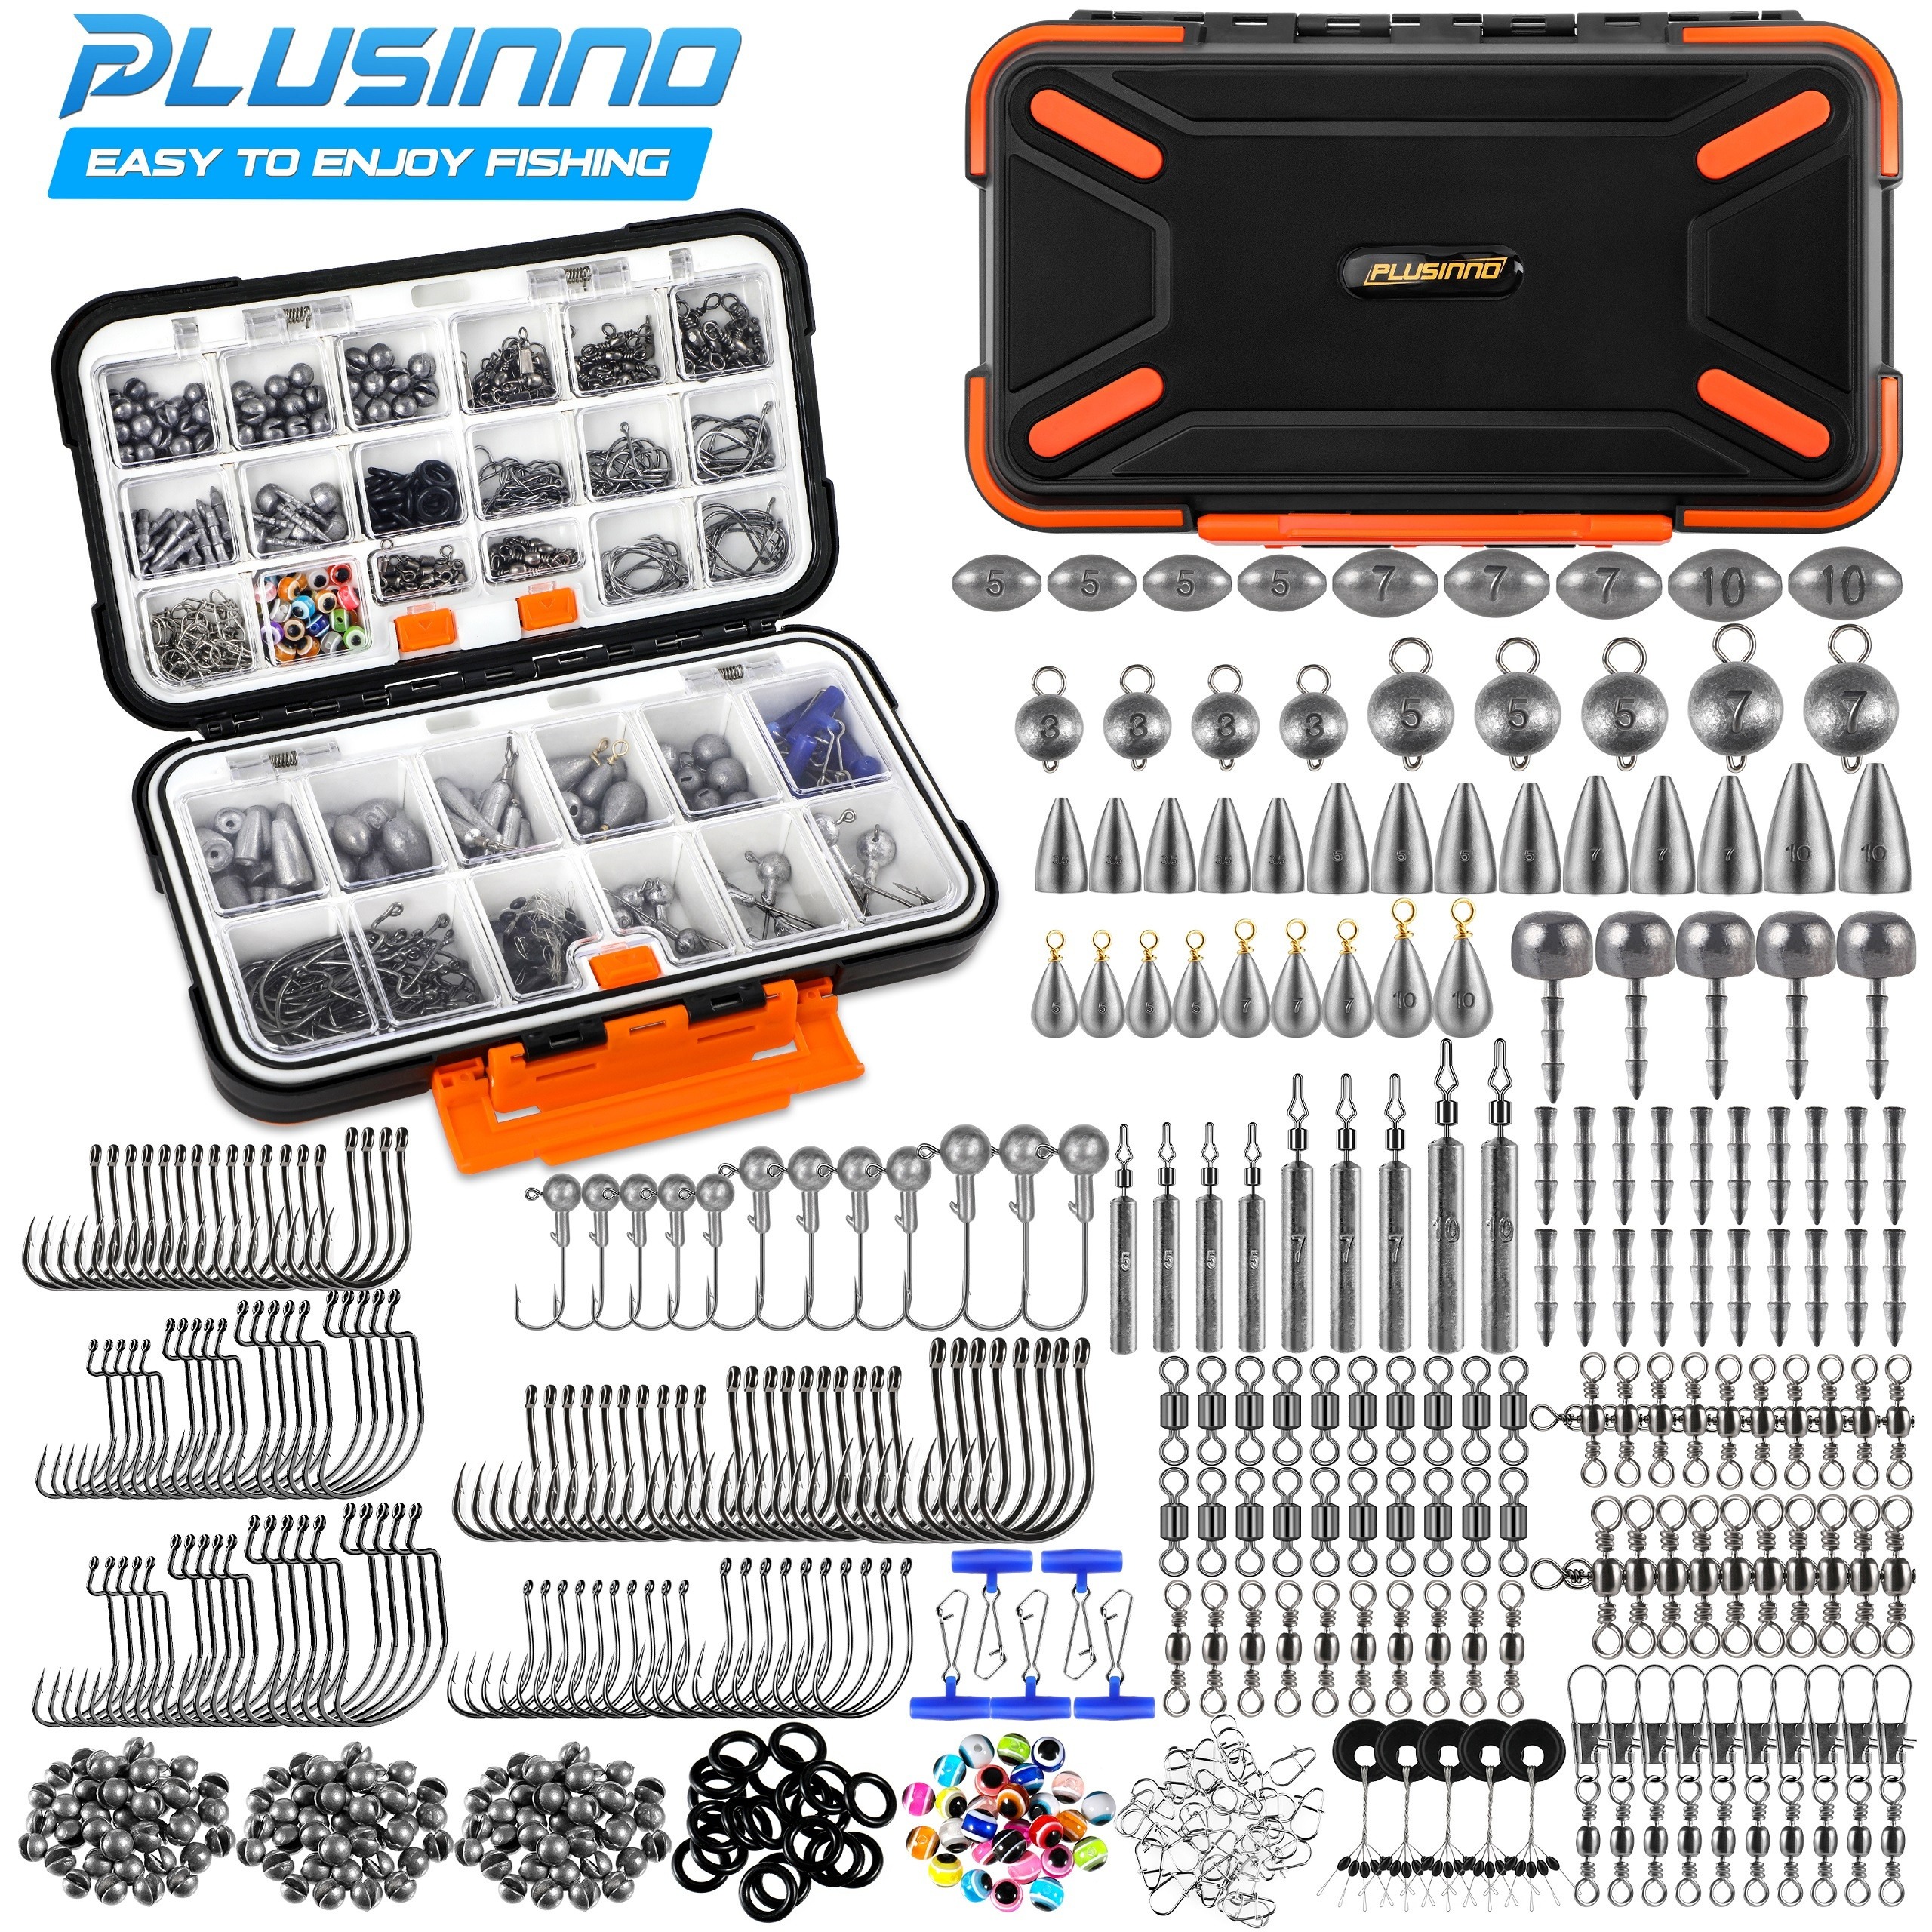 

Plusinno 397pcs Fishing Accessories Kit, Tackle Box With Tackle Included, Fishing Hooks, Fishing Weights Sinkers, Swivels, Beads, Fishing Gear Set Equipment For Bass Trout